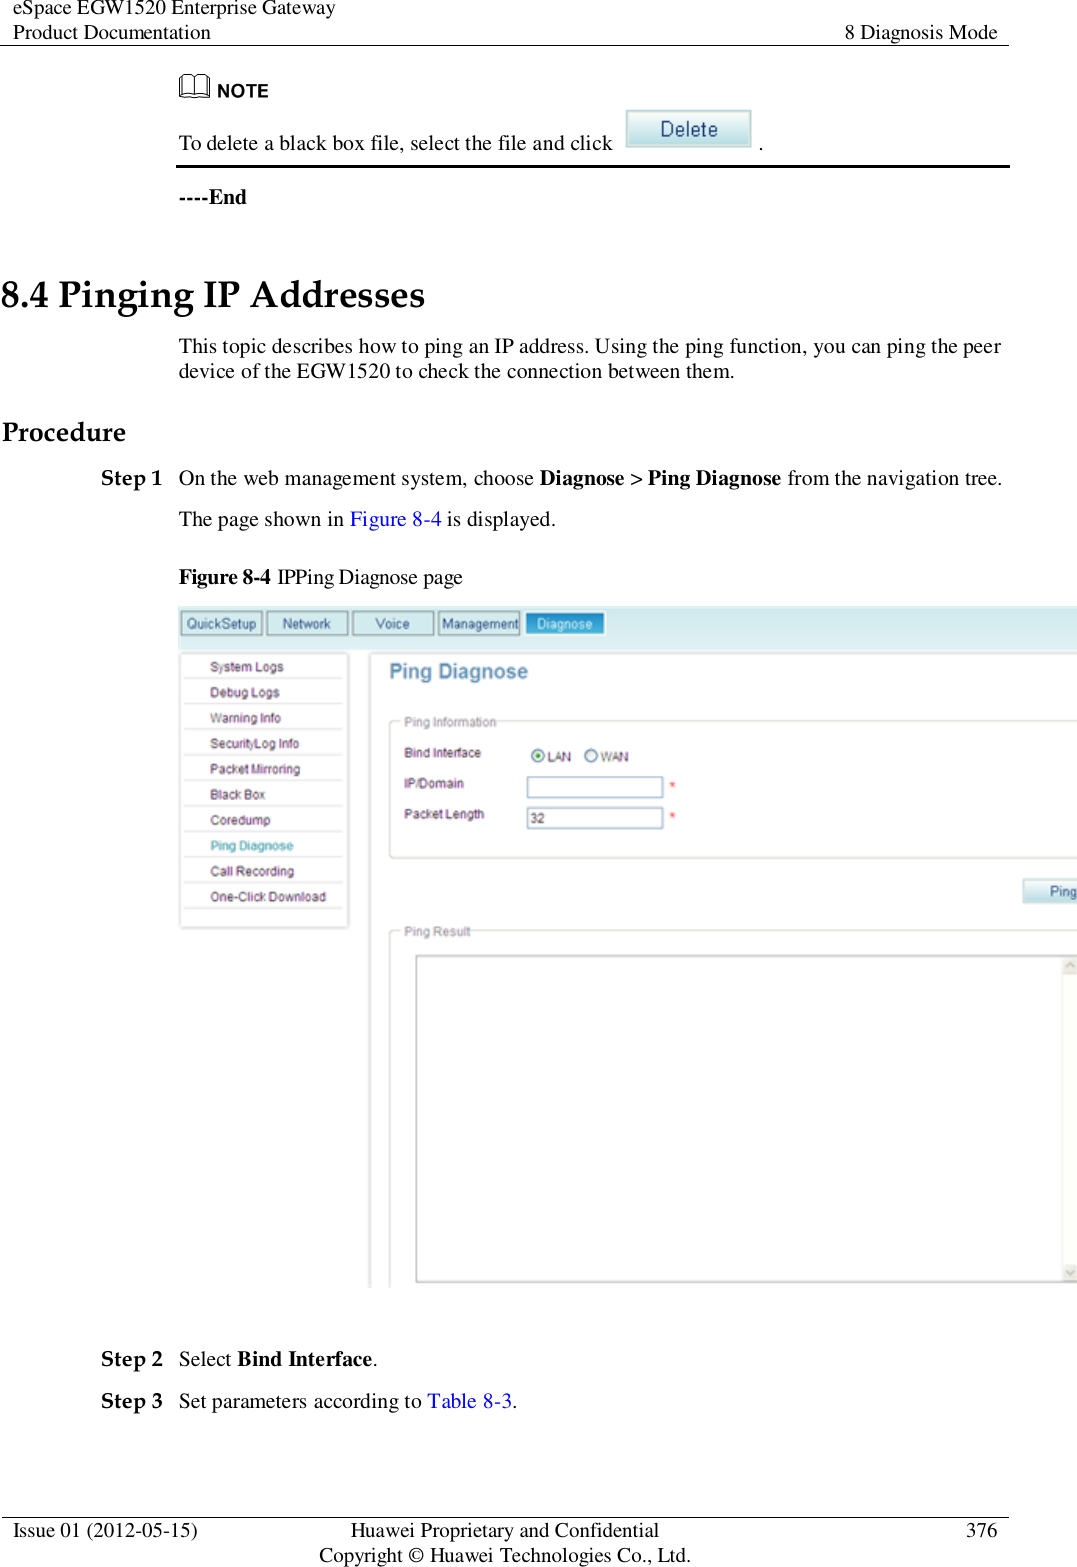 eSpace EGW1520 Enterprise Gateway Product Documentation 8 Diagnosis Mode  Issue 01 (2012-05-15) Huawei Proprietary and Confidential                                     Copyright © Huawei Technologies Co., Ltd. 376   To delete a black box file, select the file and click  . ----End 8.4 Pinging IP Addresses This topic describes how to ping an IP address. Using the ping function, you can ping the peer device of the EGW1520 to check the connection between them. Procedure Step 1 On the web management system, choose Diagnose &gt; Ping Diagnose from the navigation tree. The page shown in Figure 8-4 is displayed. Figure 8-4 IPPing Diagnose page   Step 2 Select Bind Interface. Step 3 Set parameters according to Table 8-3. 